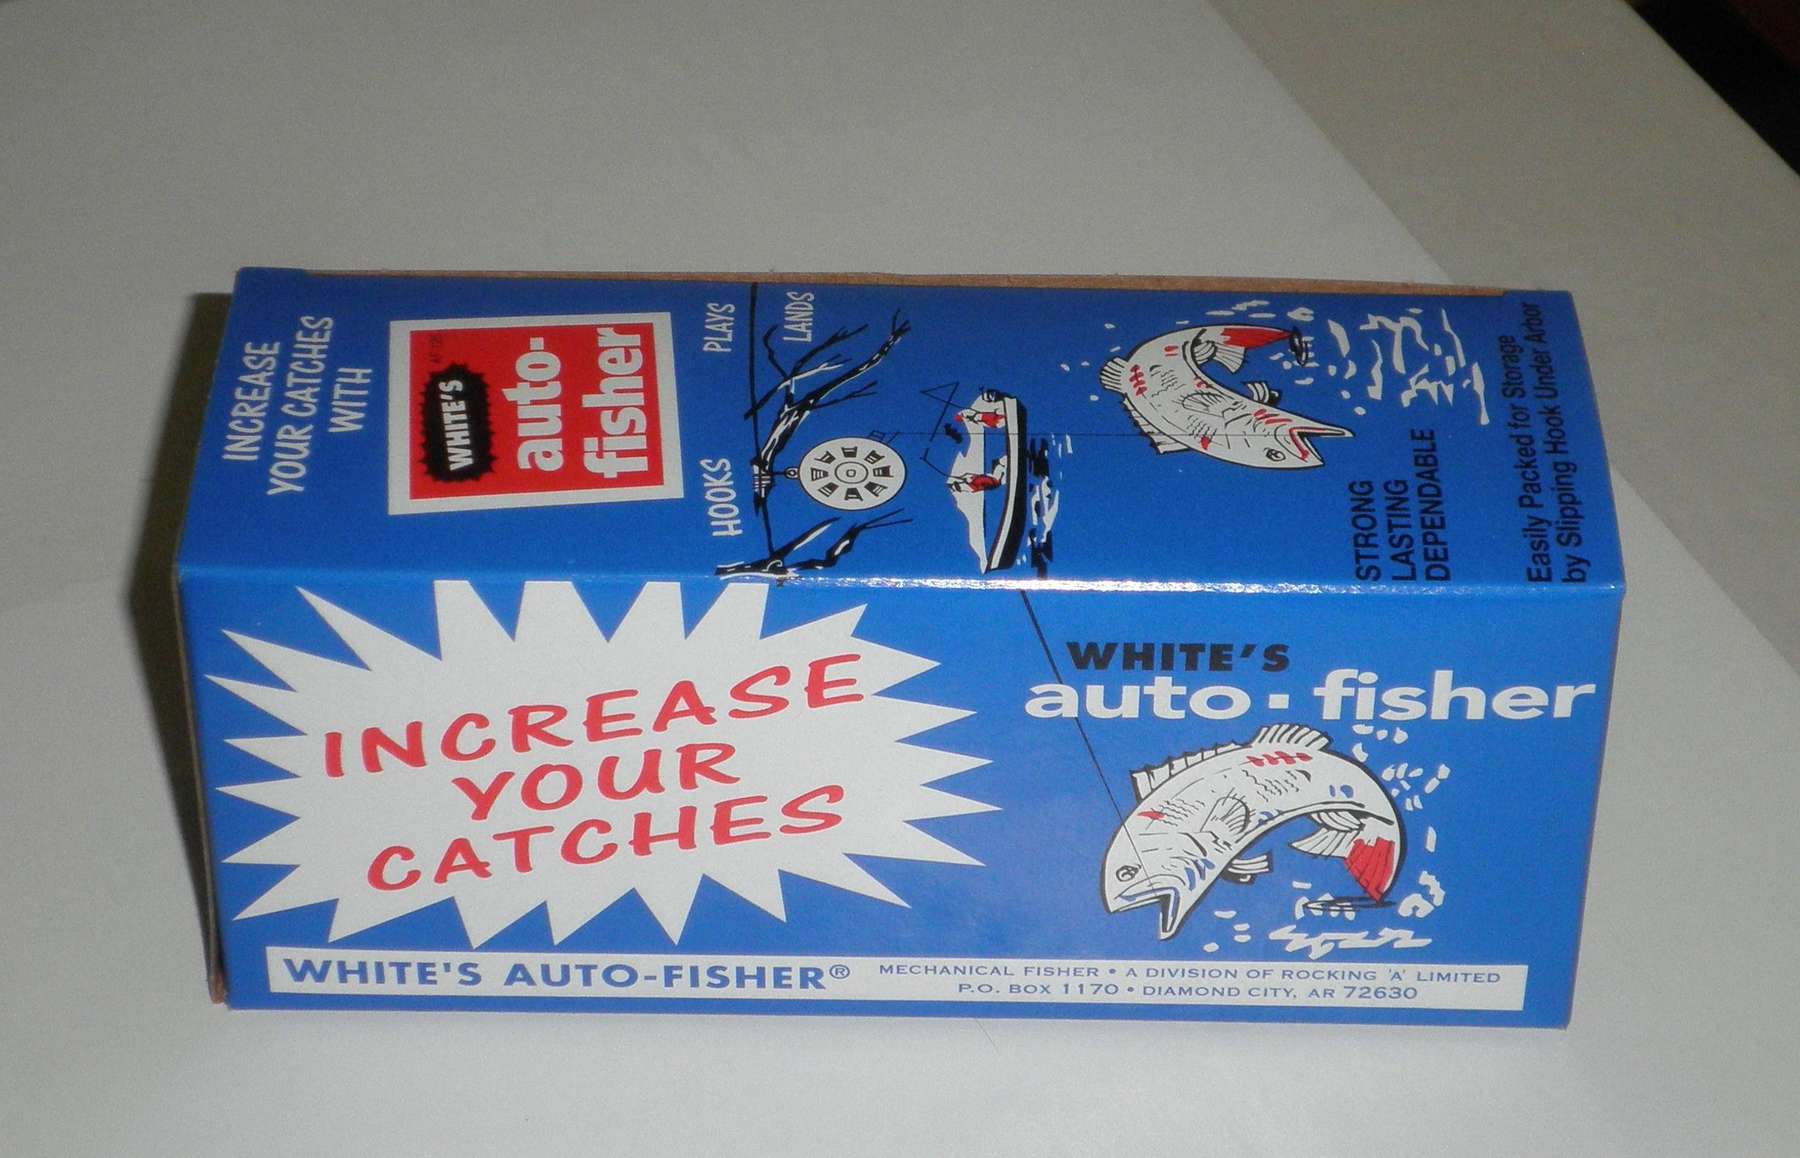 Mechanical Whites Auto Fisher 12 Pack - Excellent Device For Ice Fishing